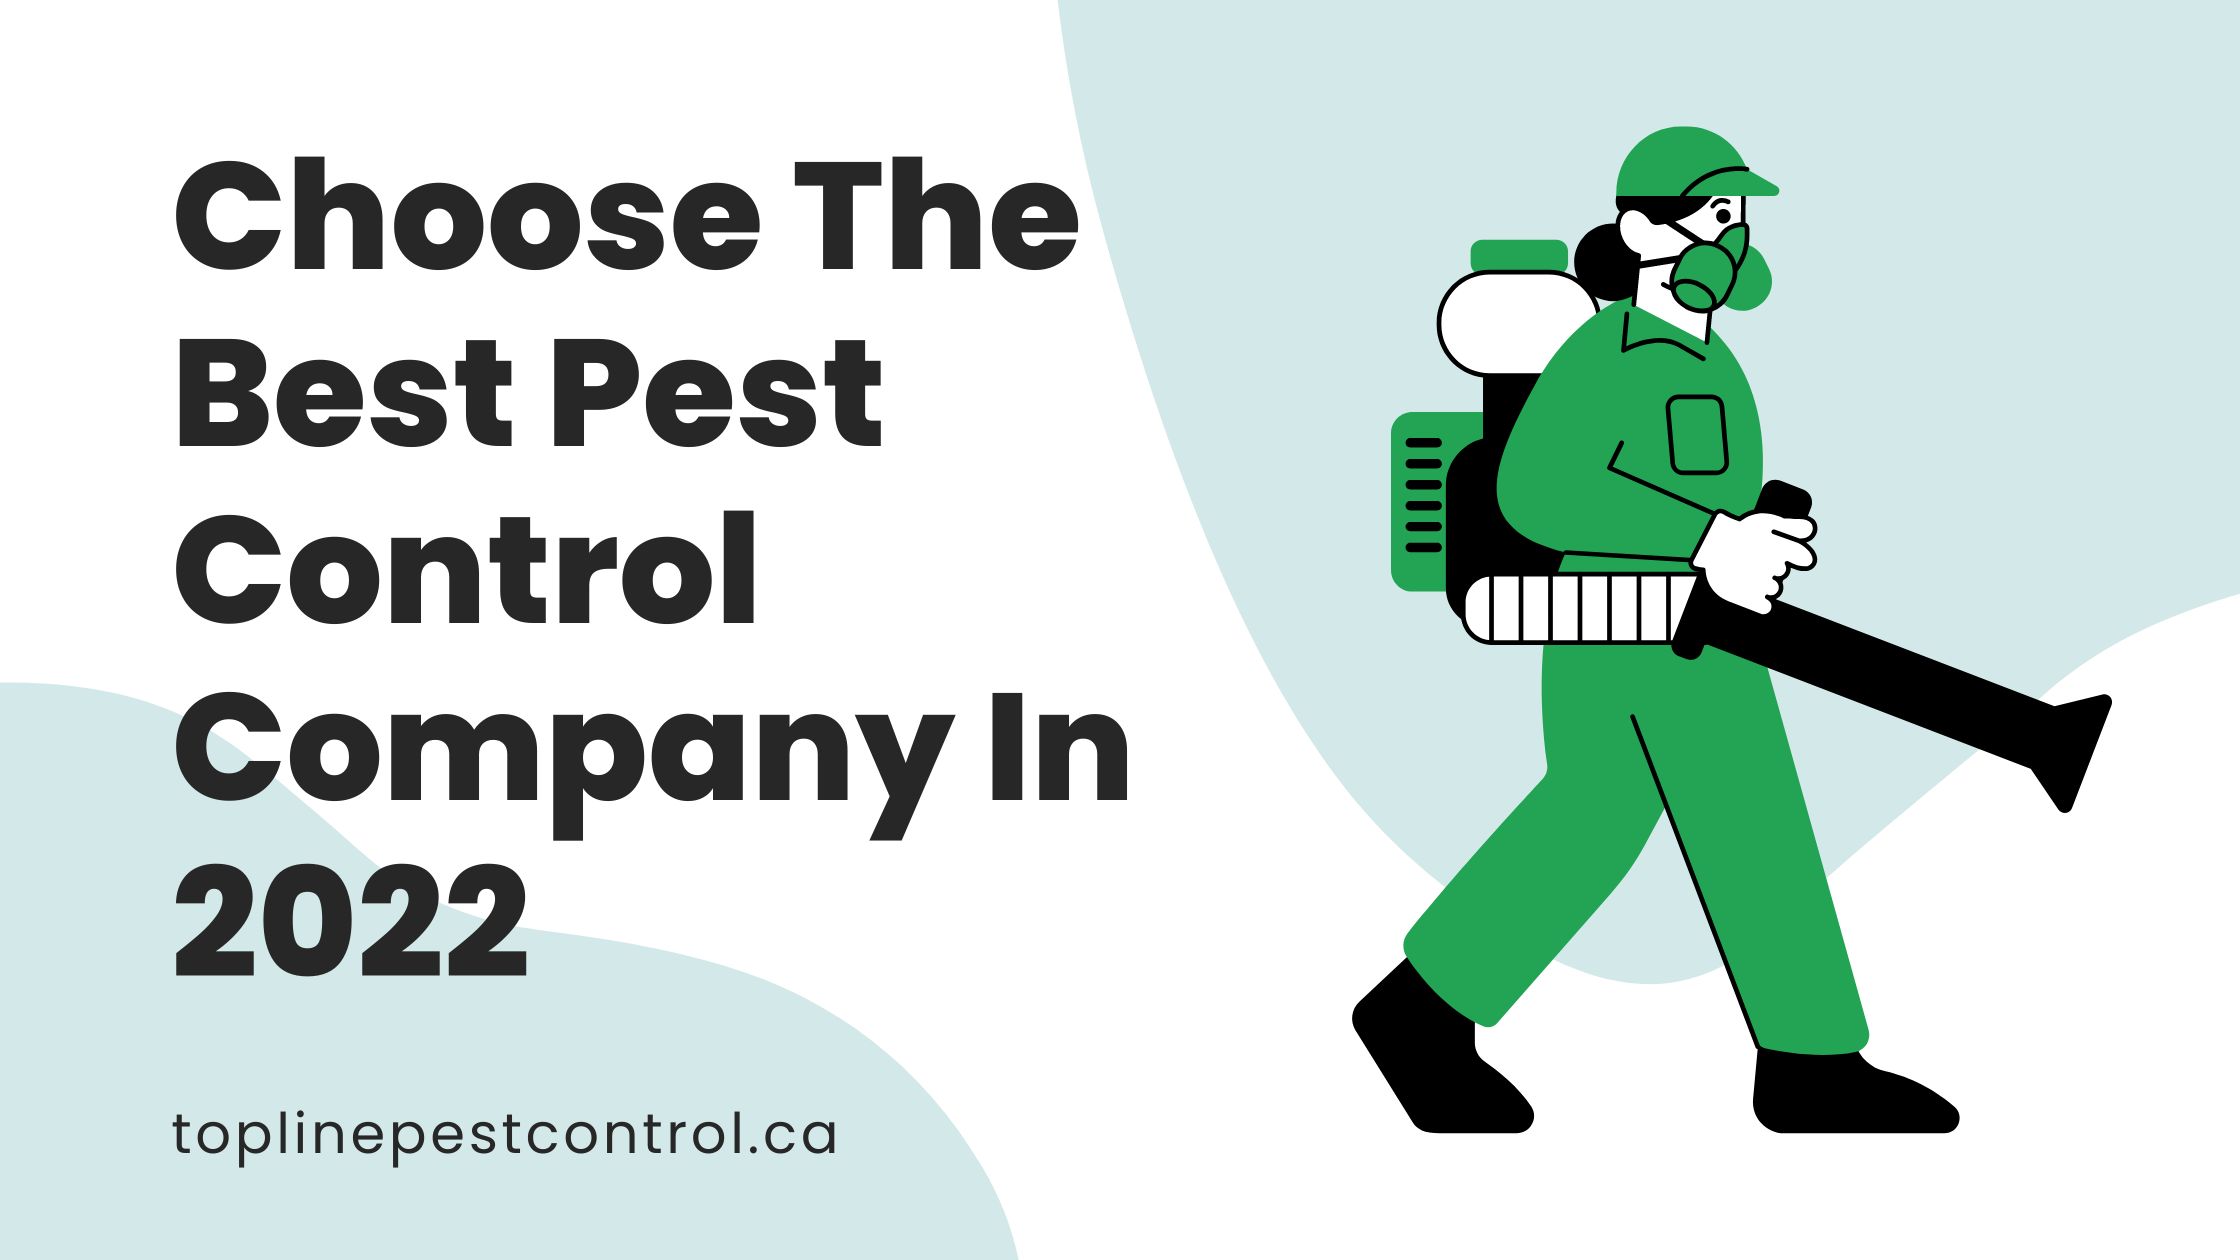 Choose The Best Pest Control Company In 2022